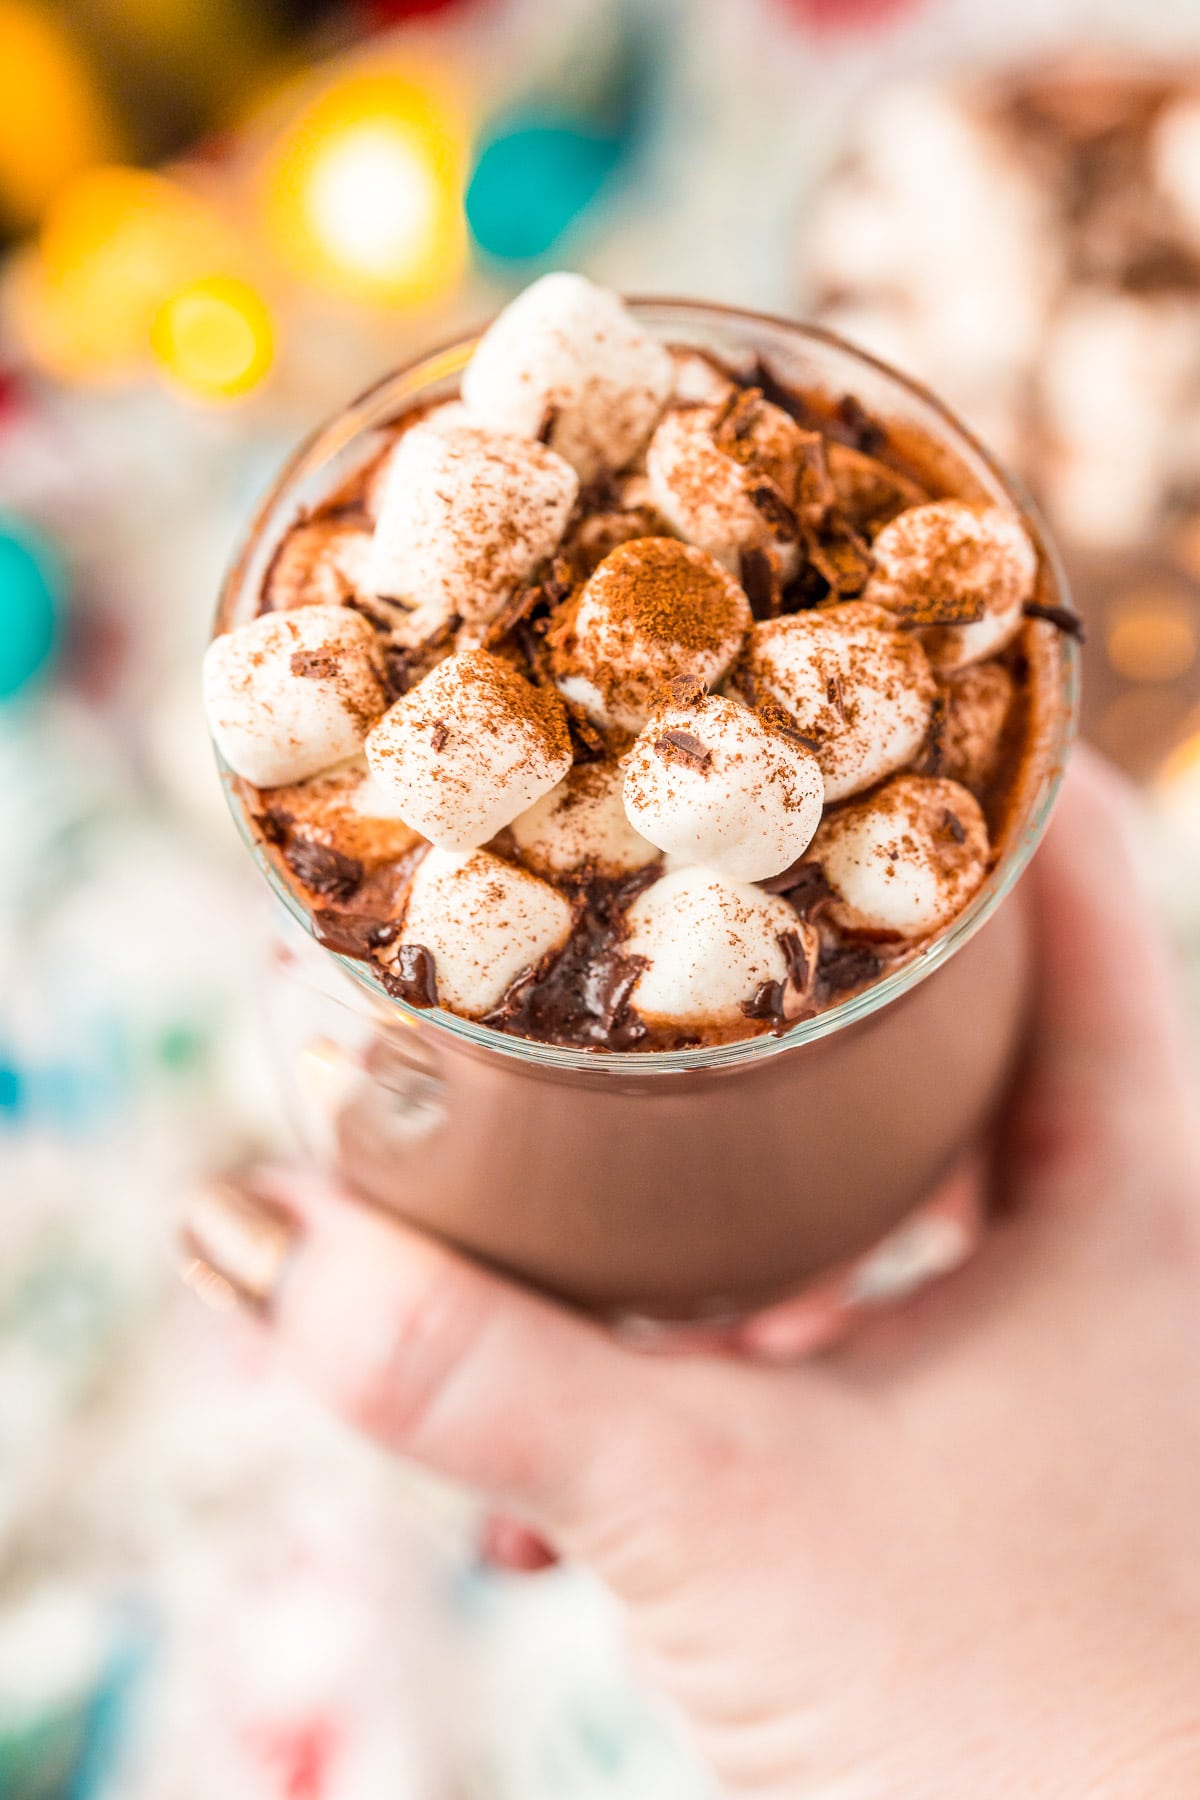 Woman's hand holding a mug of hot chocolate topped with marshmallows and cinnamon.